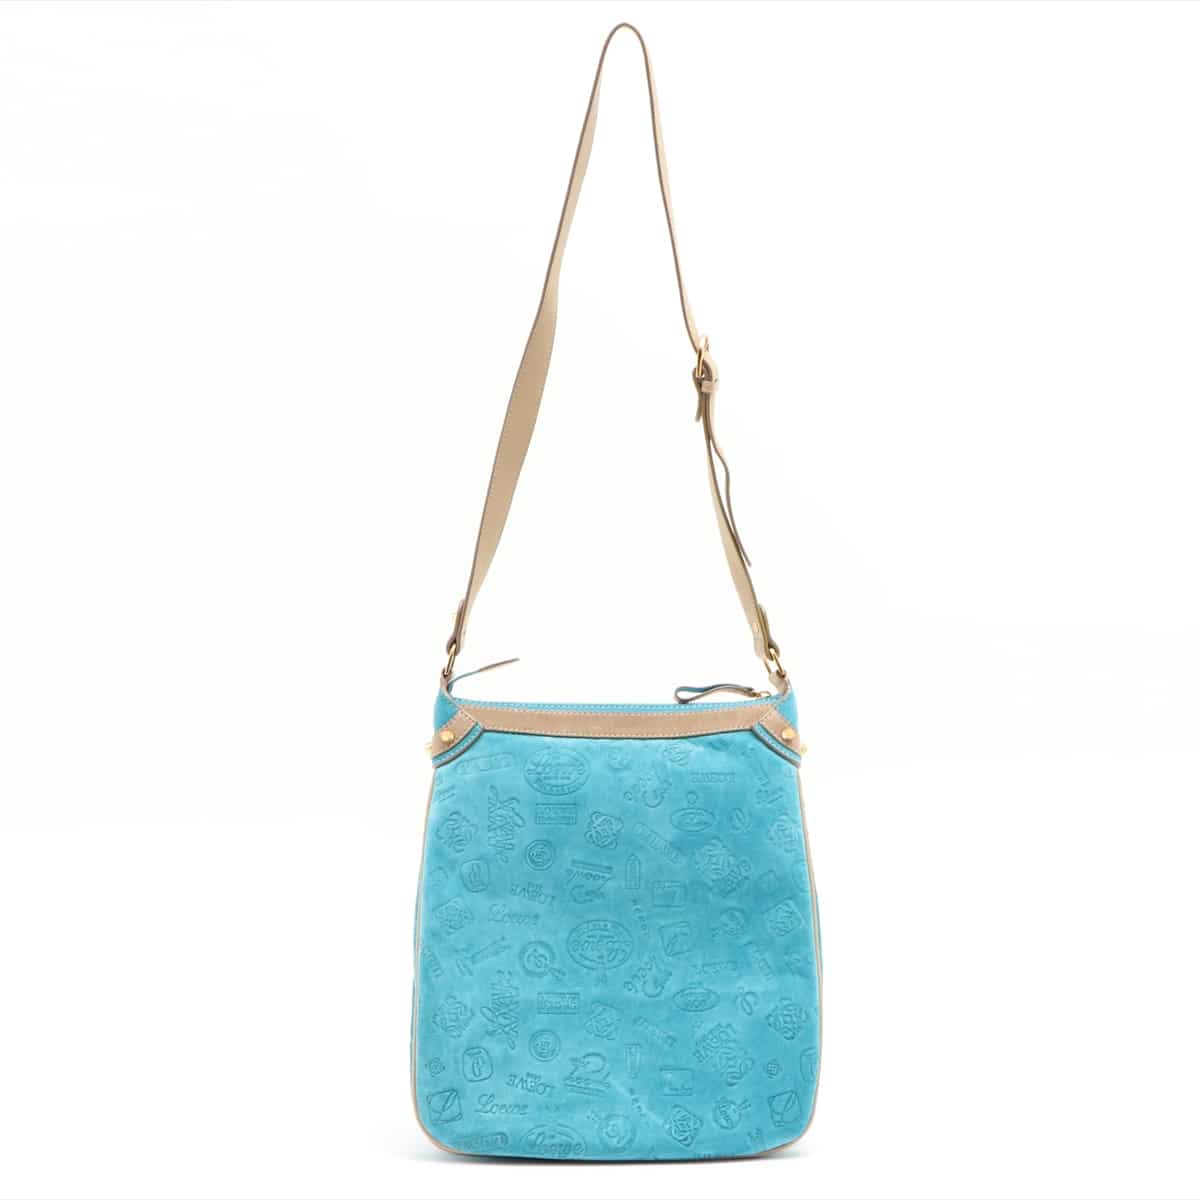 Loewe Suede Shoulder bag Blue Limited to the 160th anniversary